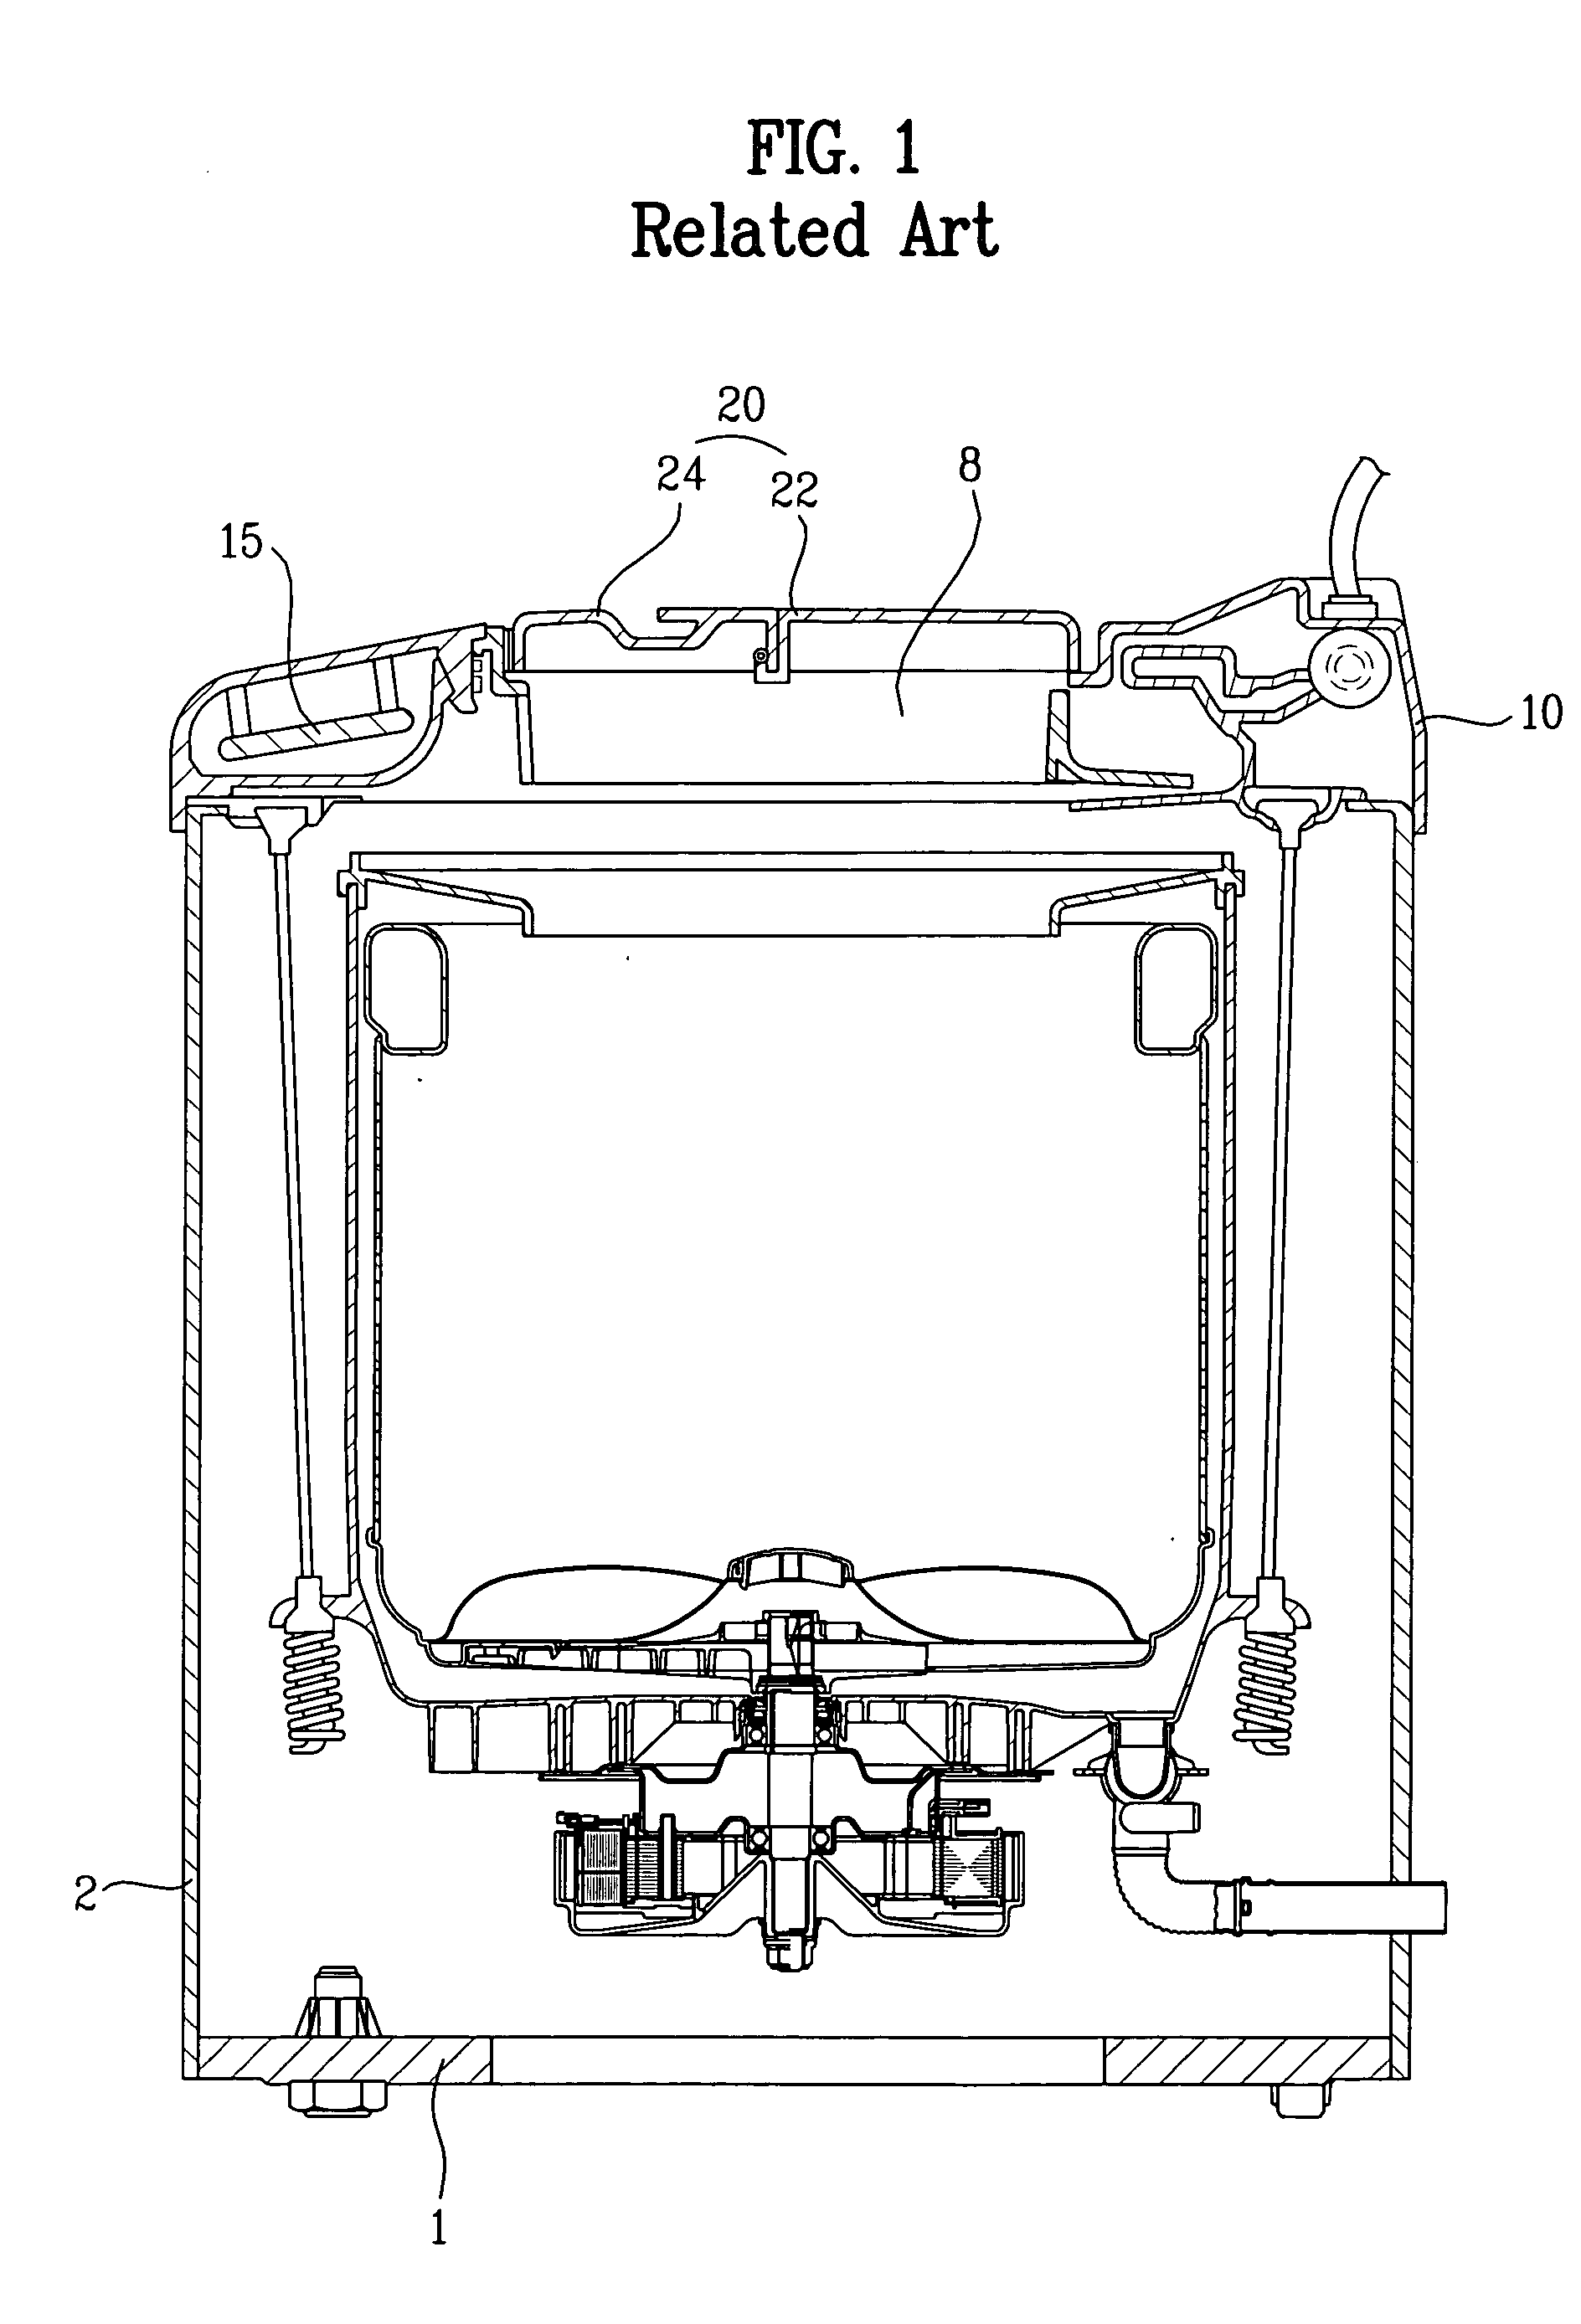 Door assembly for washing machine